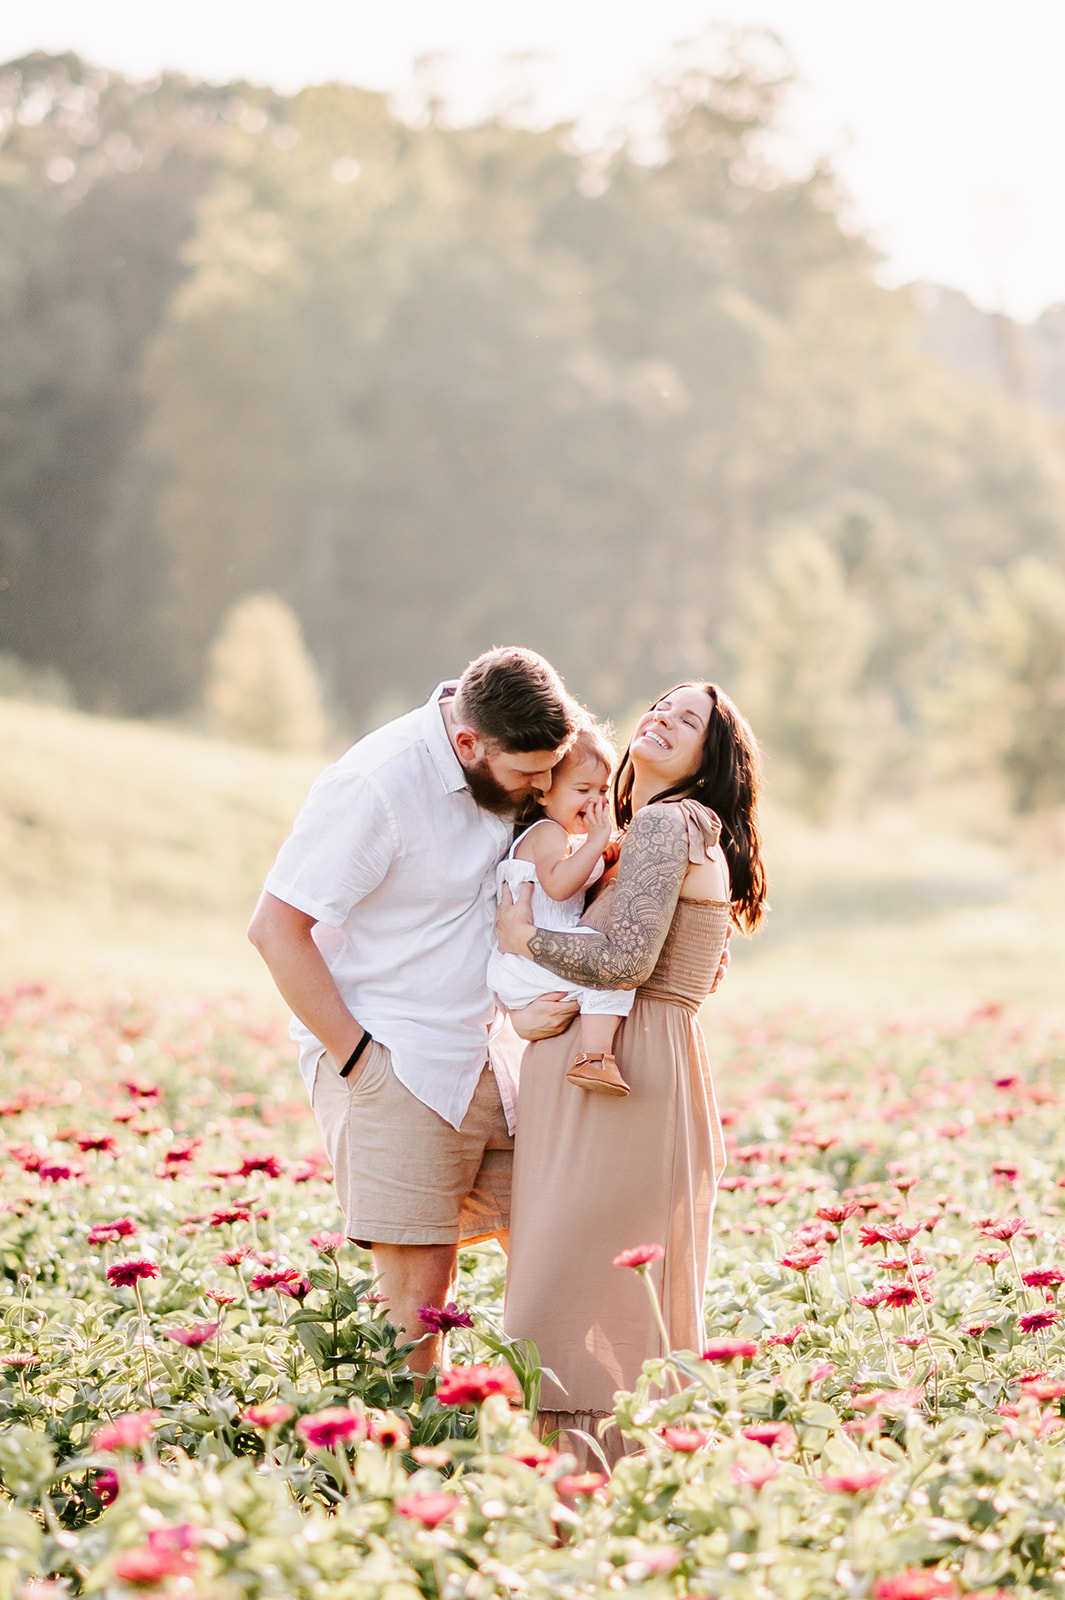 A toddler girl in a white dress sits on her pregnant mom's bump while dad leans in to play with them while standing in a field of flowers